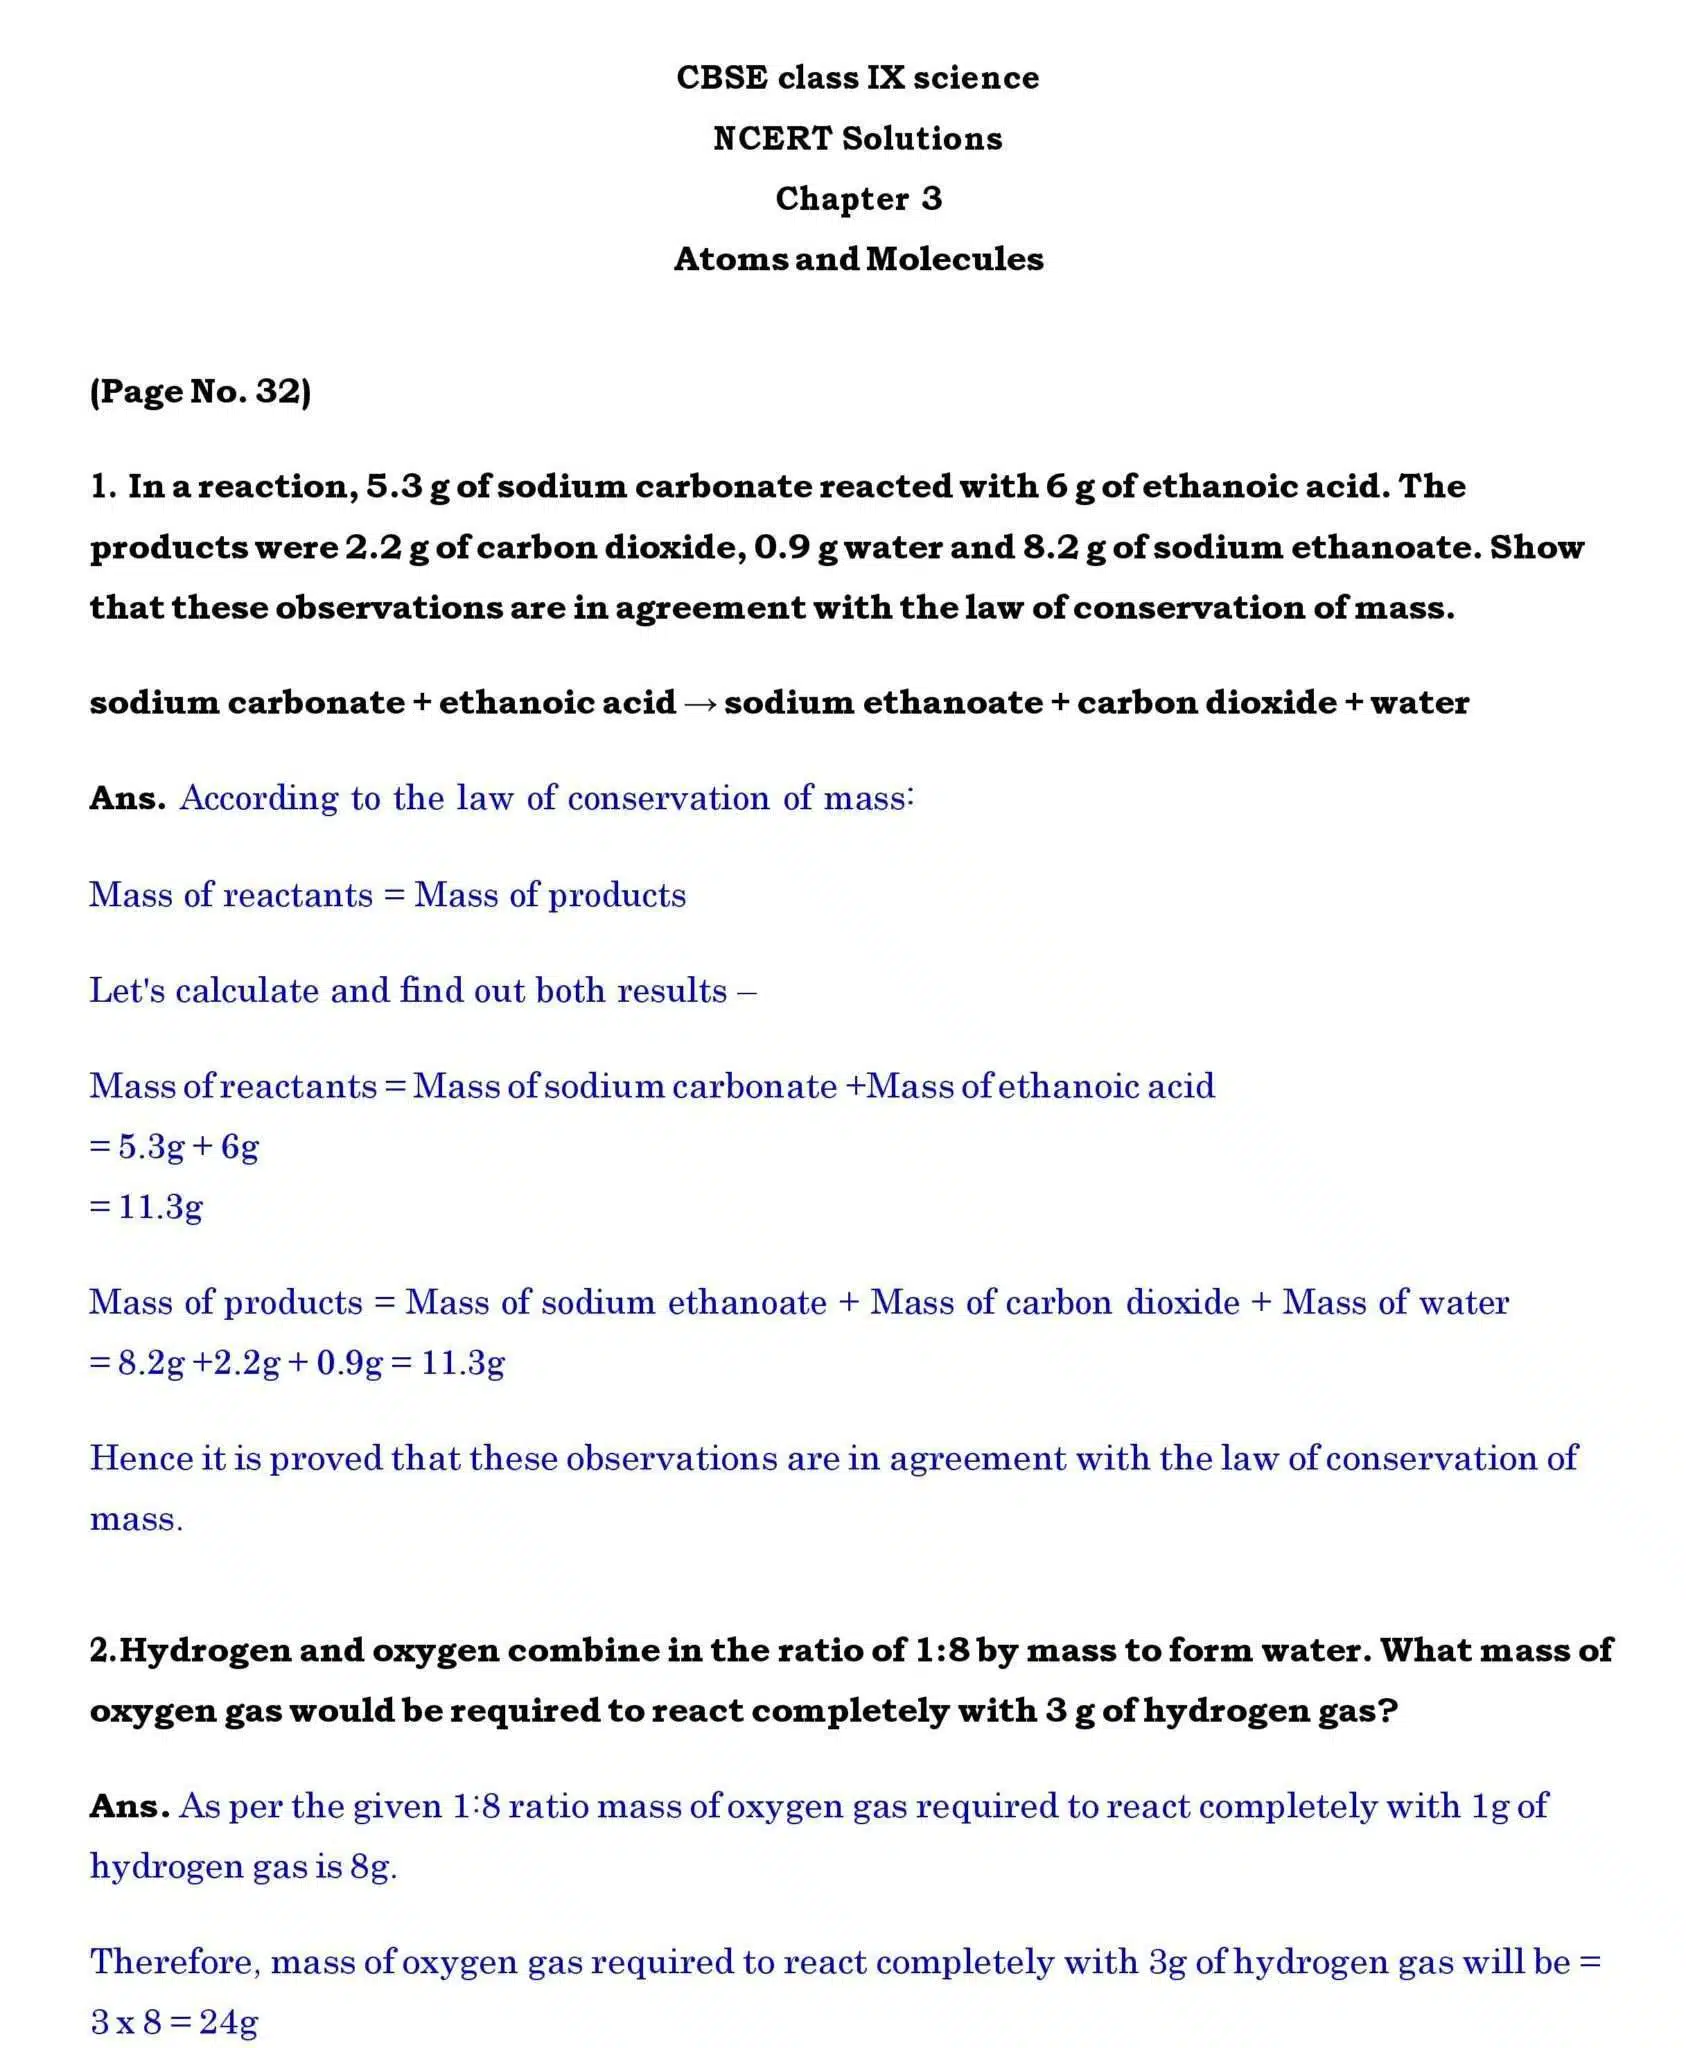 Ch 3 Science Atoms and Molecules page 001